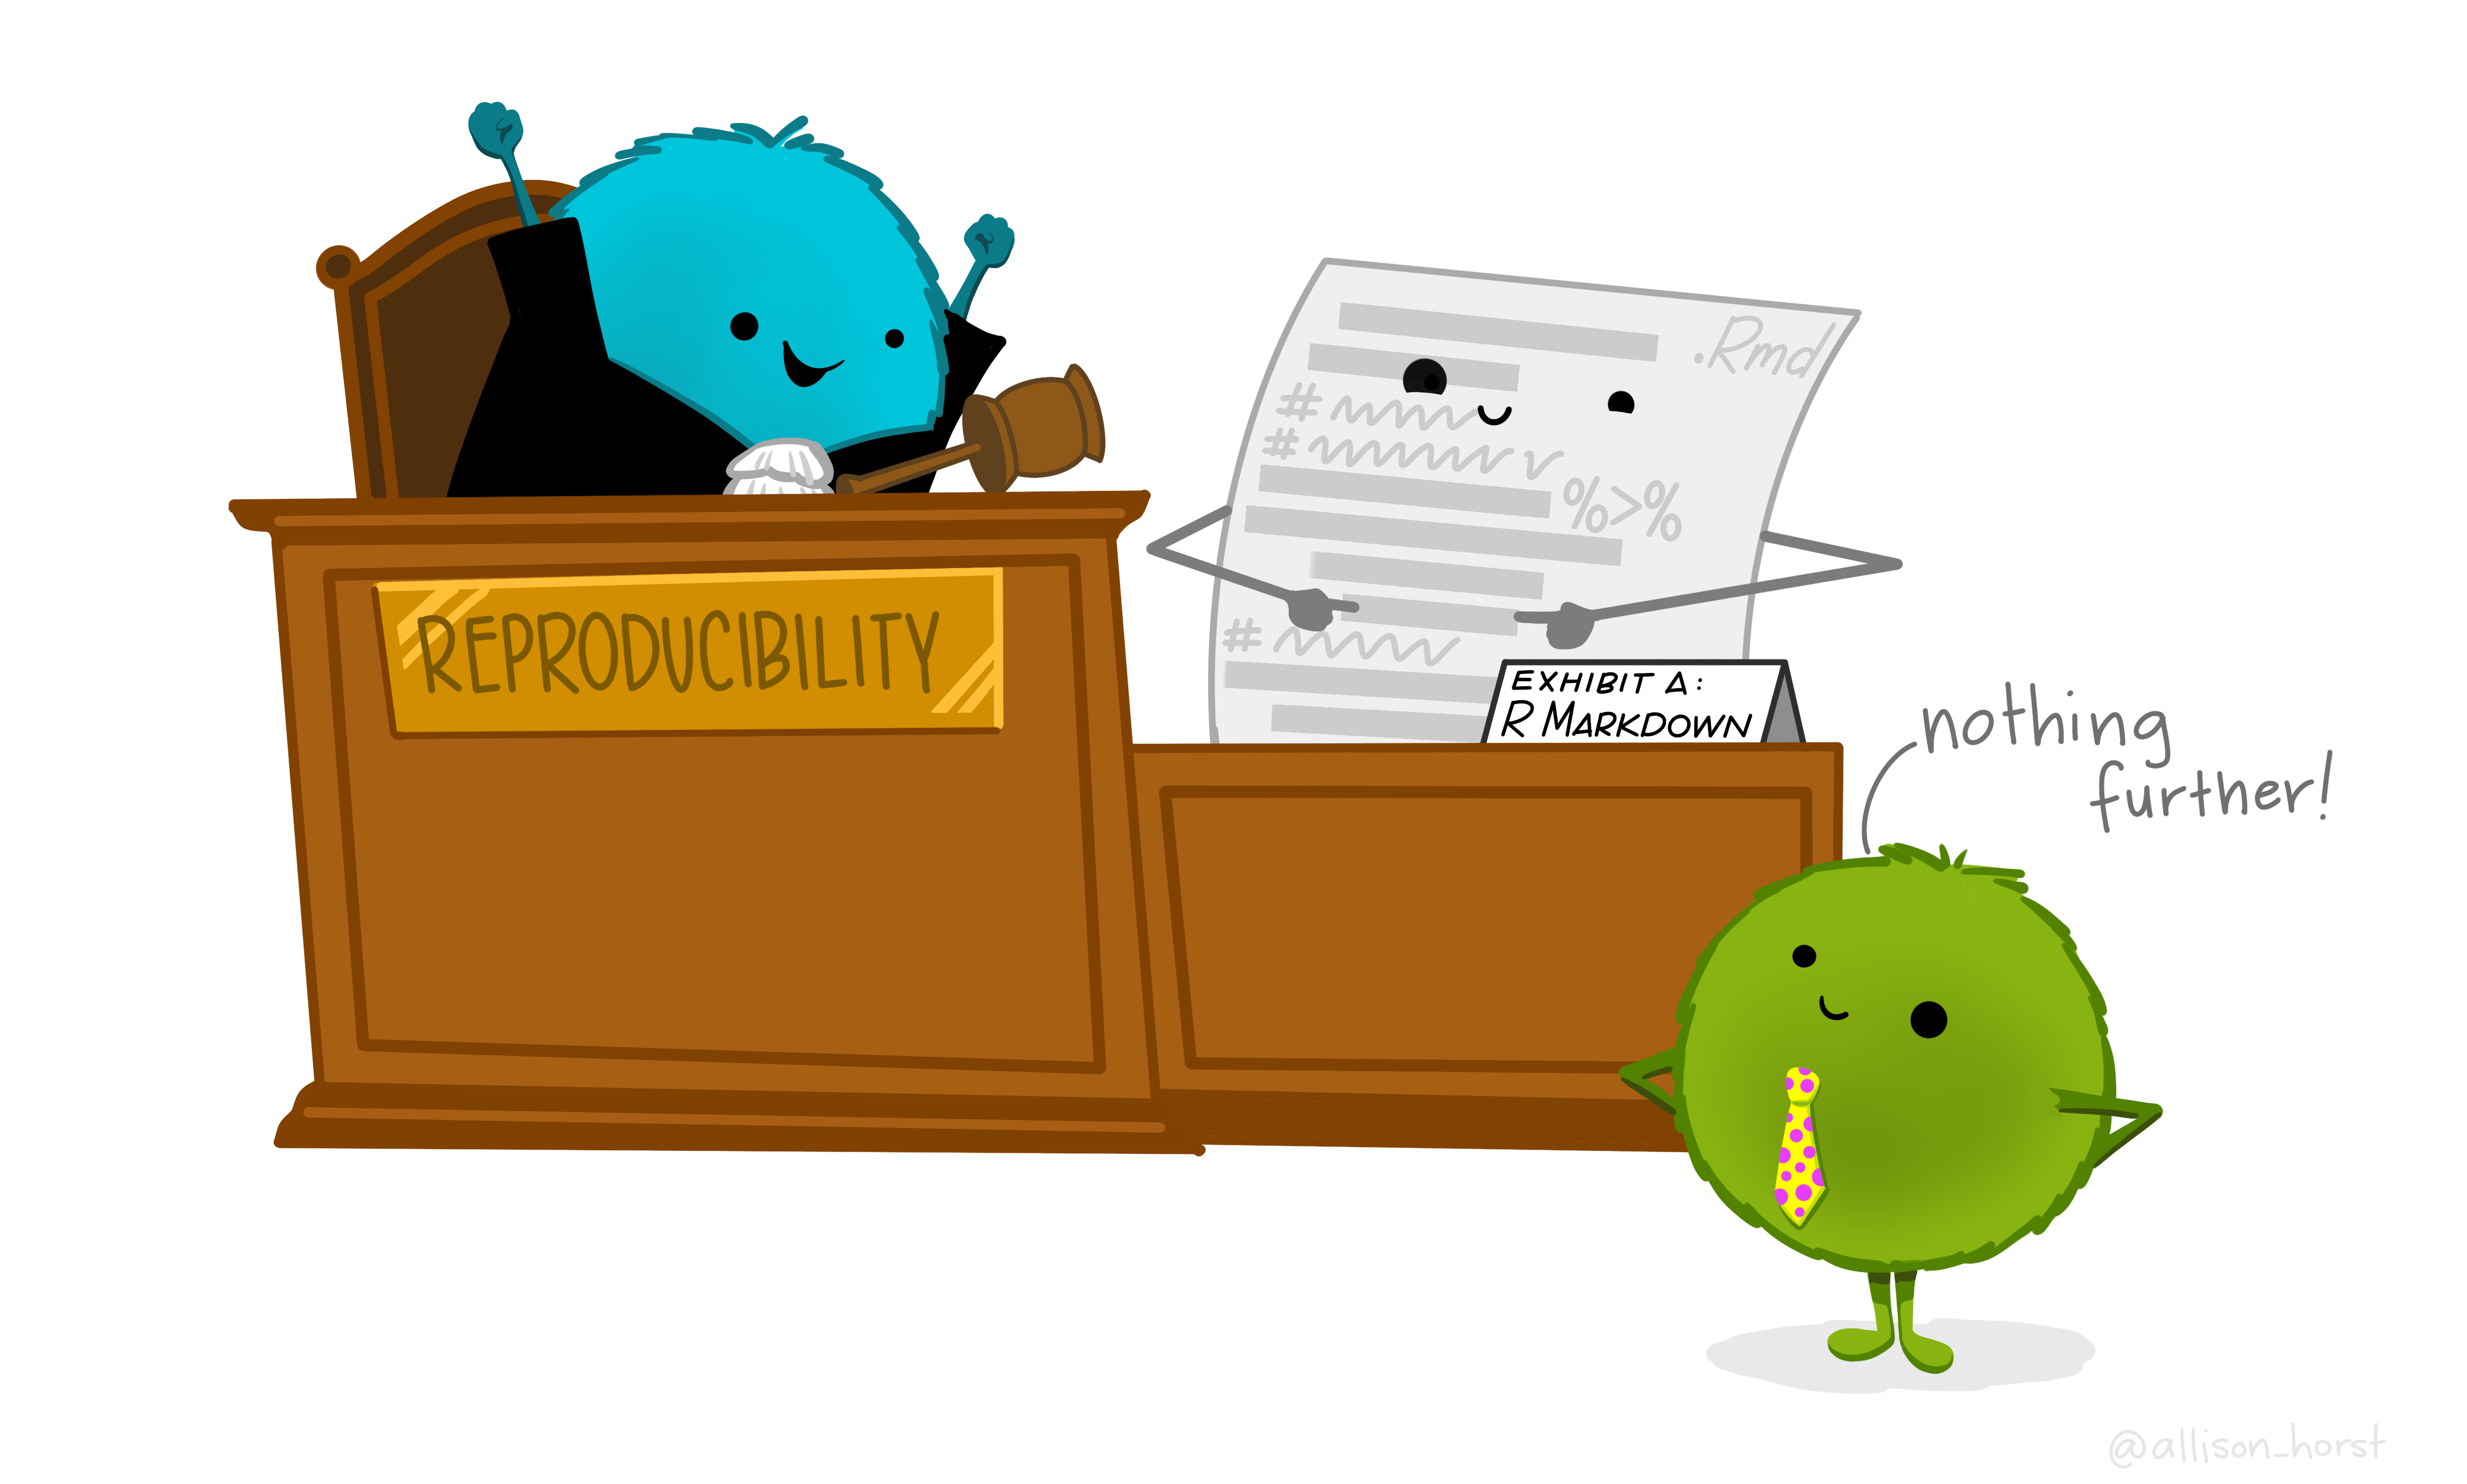 A judge’s desk labeled “Reproducibility” with a witness stand right next to it. On the witness stand is a smiling and confident R Markdown document pointing at some lines of code on itself. A fuzzy monster lawyer in a polka-dot tie stands proudly saying “Nothing further!” The judge (also a cute fuzzy monster) is smiling with their hands raised in celebration of reproducible work.